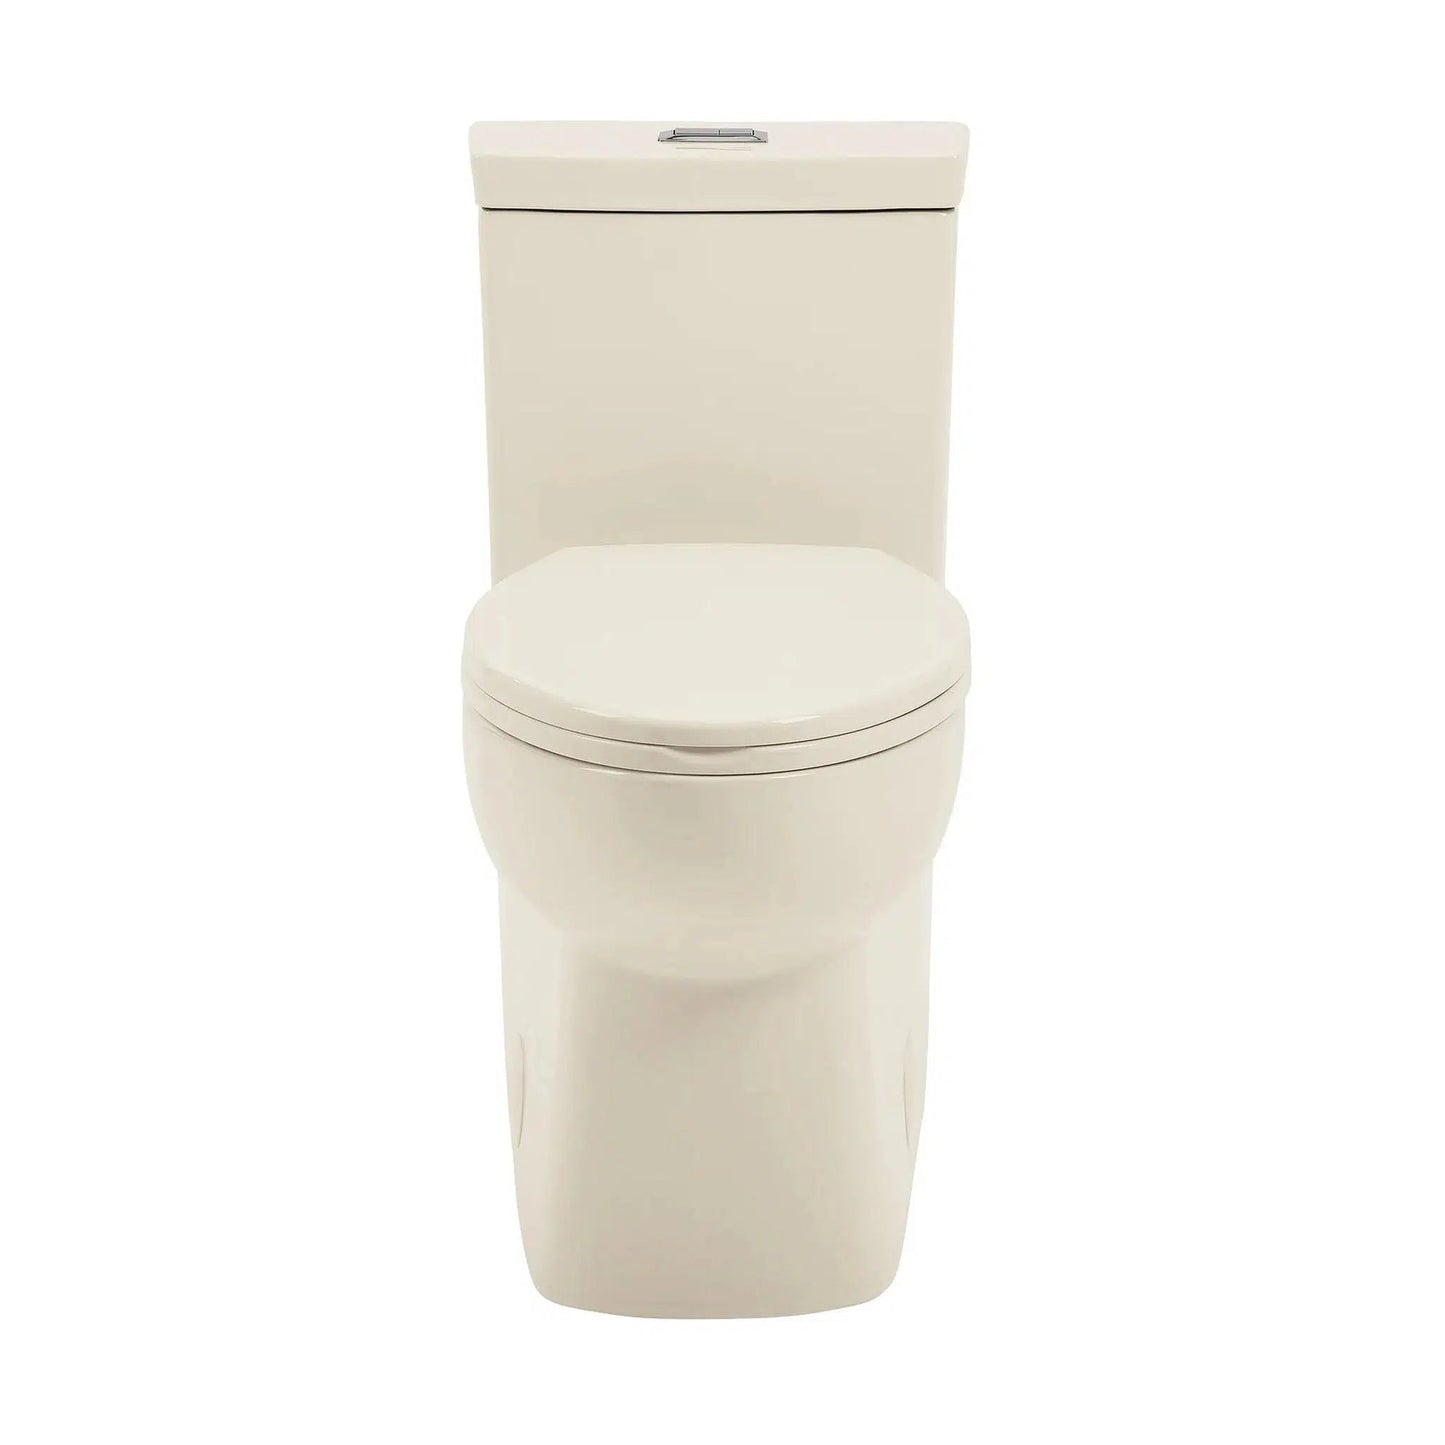 Swiss Madison Classé 15" x 30" One-Piece Bisque Elongated Floor-Mounted Toilet With 1.1/1.6 GPF